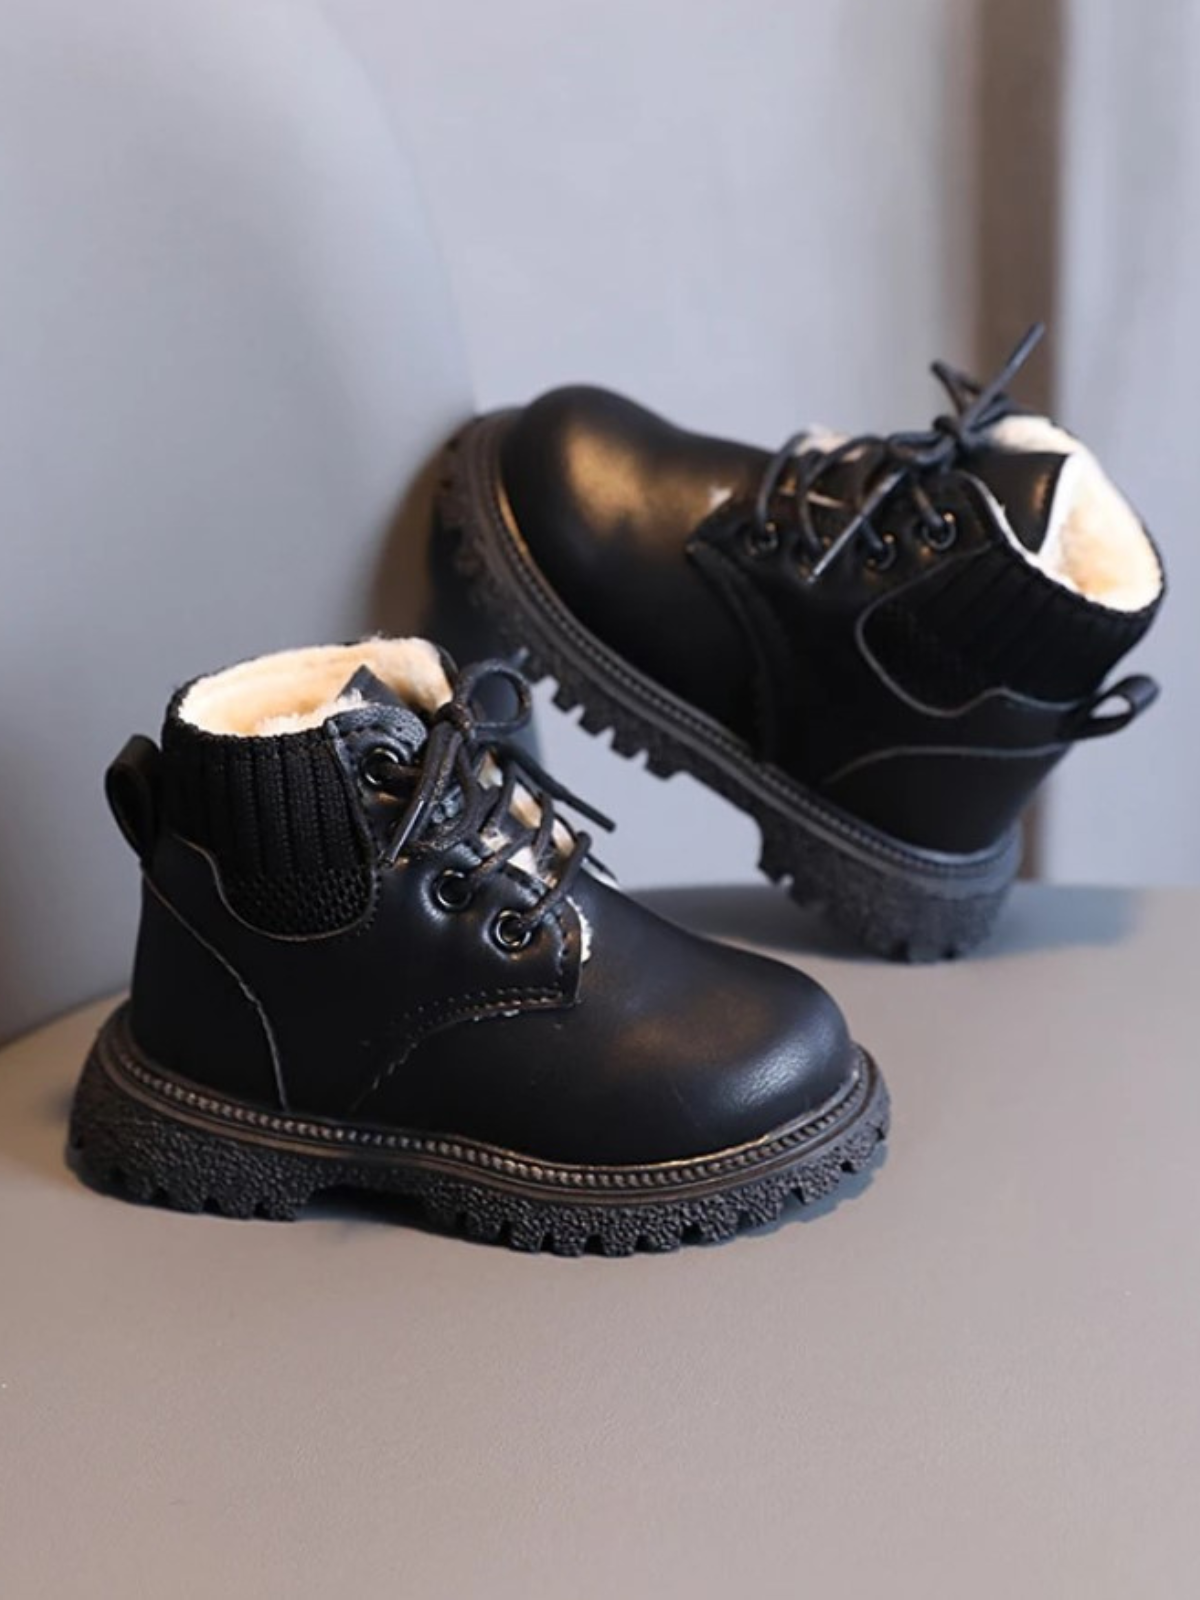 Mia Belle Girls Fur-Lined Boots | Shoes By Liv & Mia